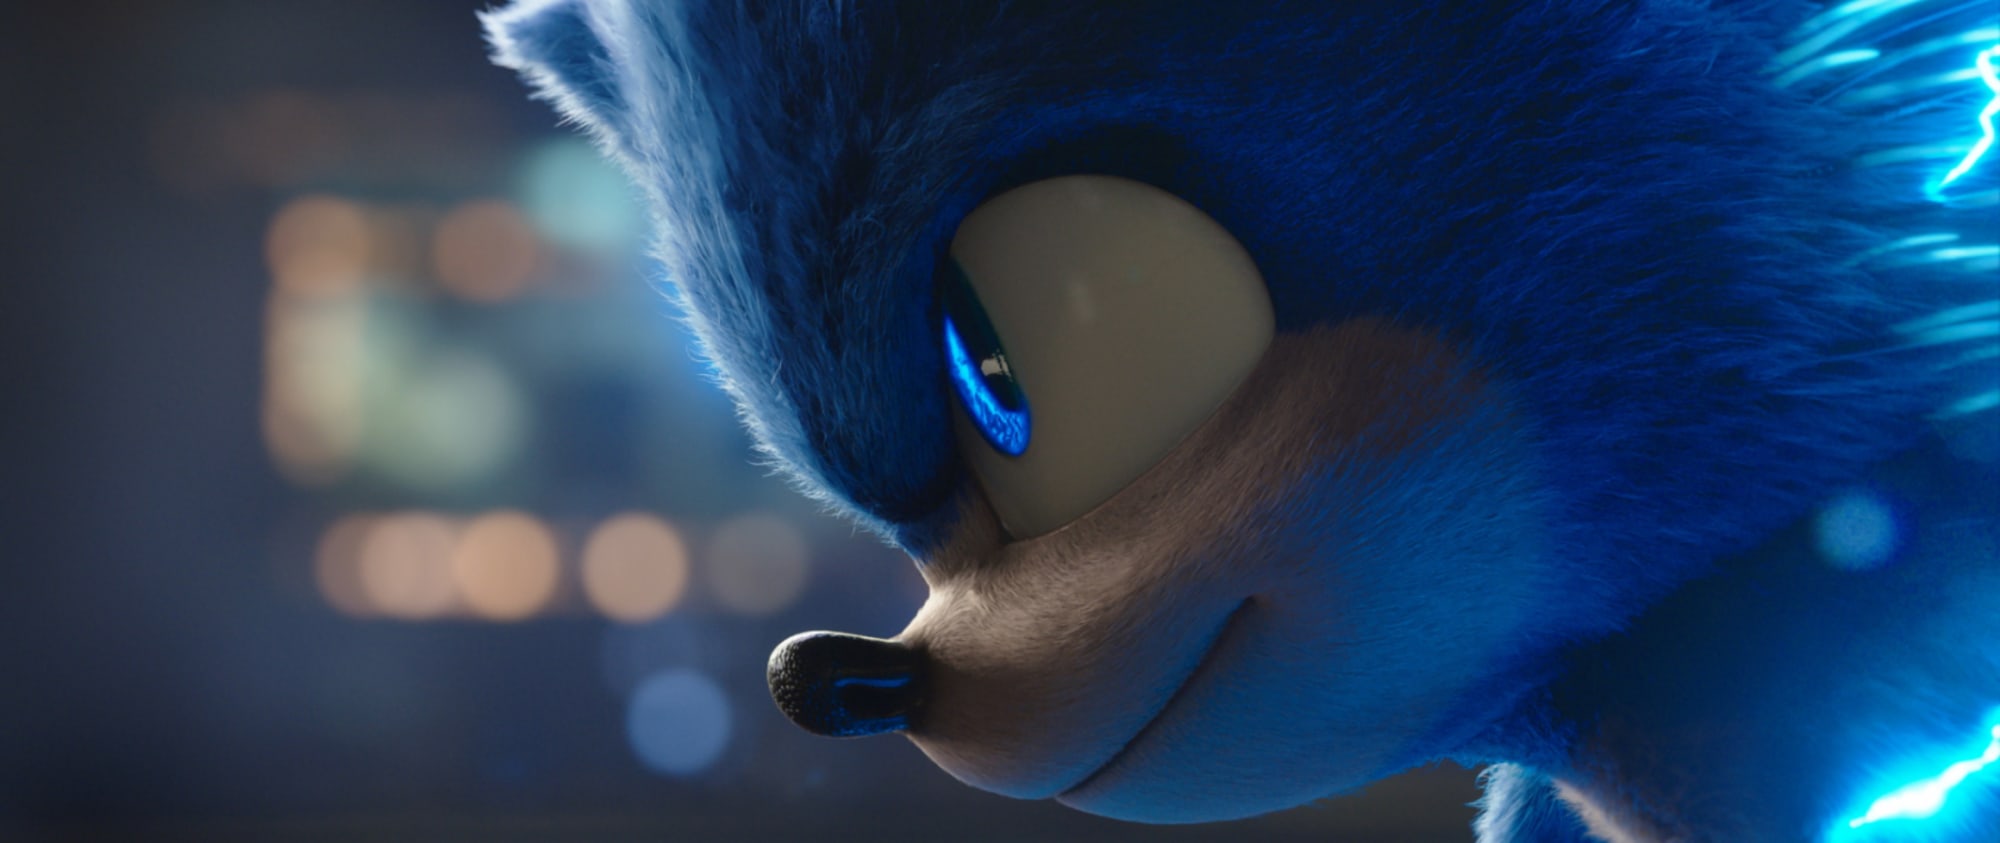 Sonic the Hedgehog' Wins the Presidents' Day Weekend Box Office